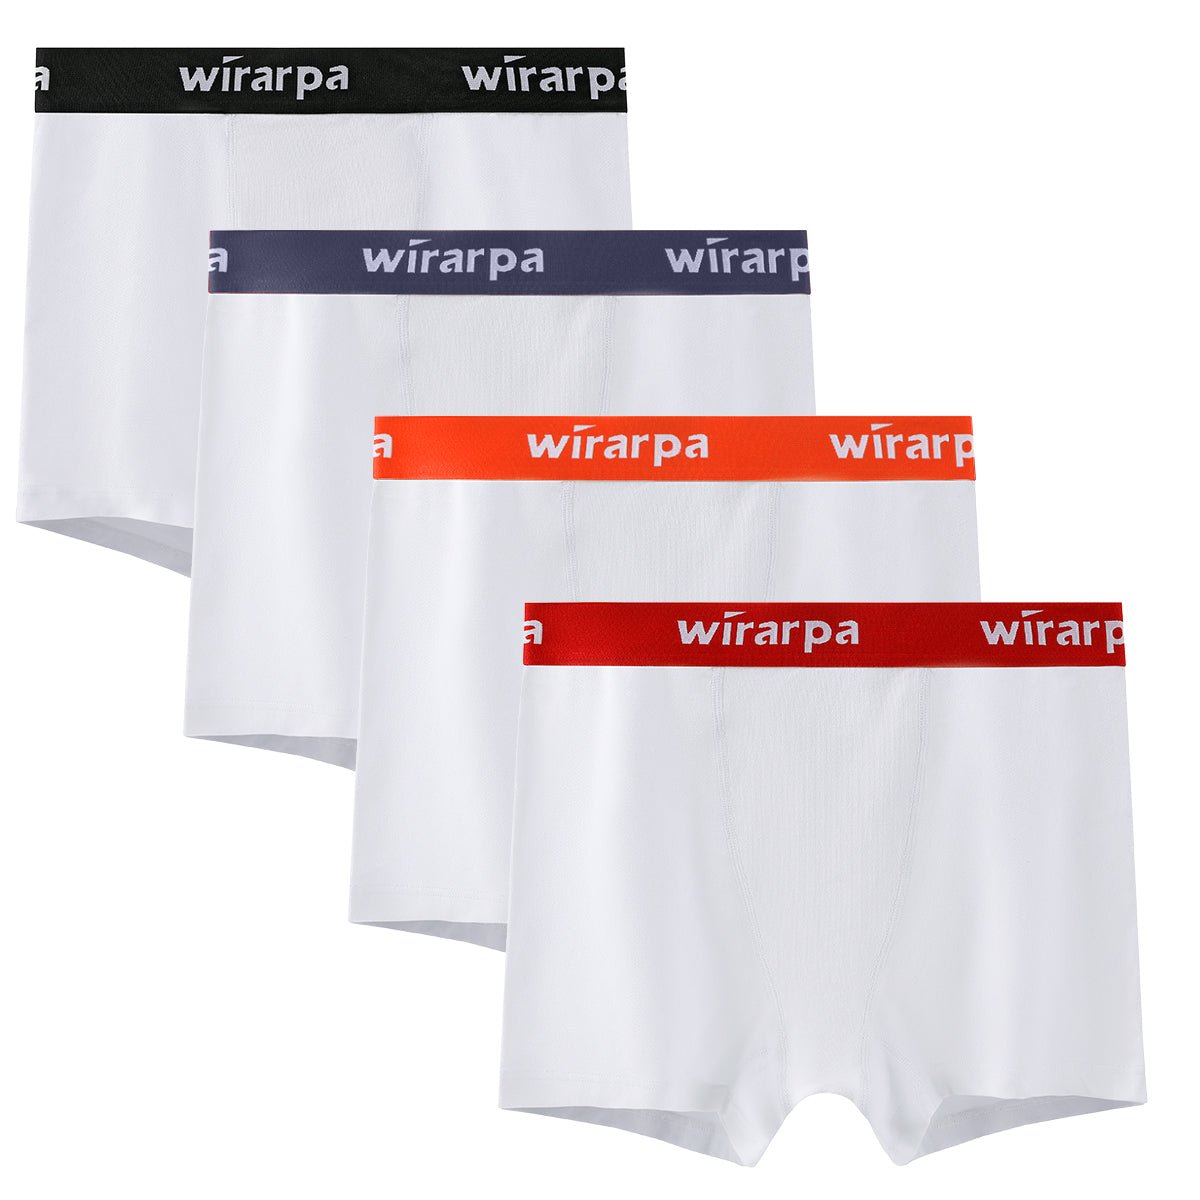  Wirarpa Womens Boxer Briefs Cotton Underwear Anti Chafing  Boy Shorts Panties 5.5 Inseam 4 Pack Multicolor Small